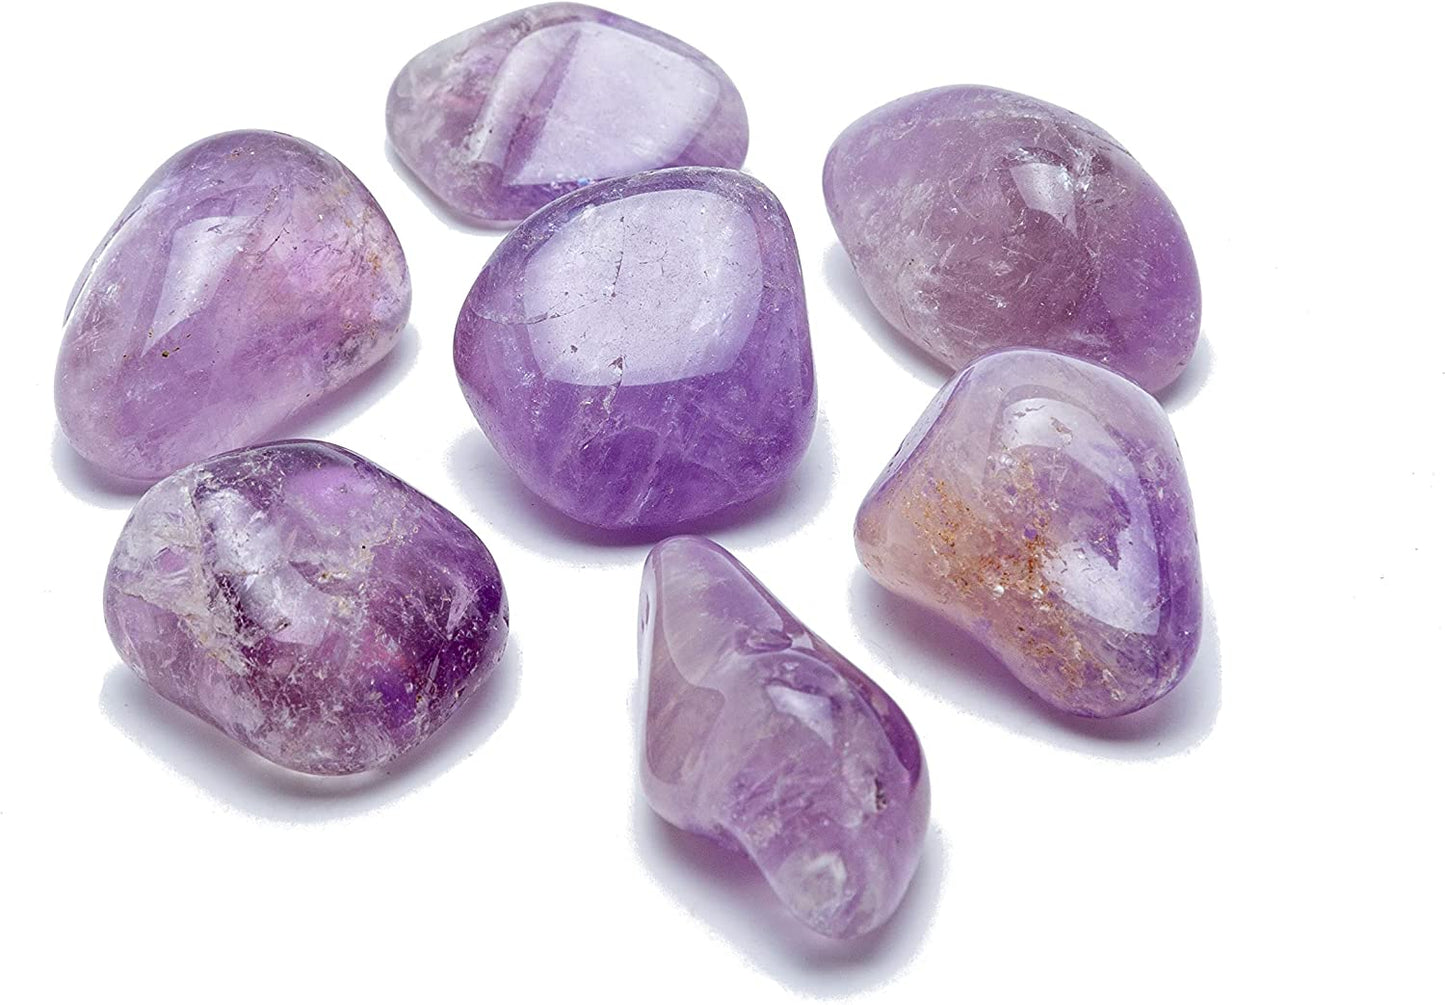 0.5 lb Bulk of Natural Tumbled Amethyst Stones with Carry-On Crafted Fabric Bag for Wicca, Reiki & Crystal Healing